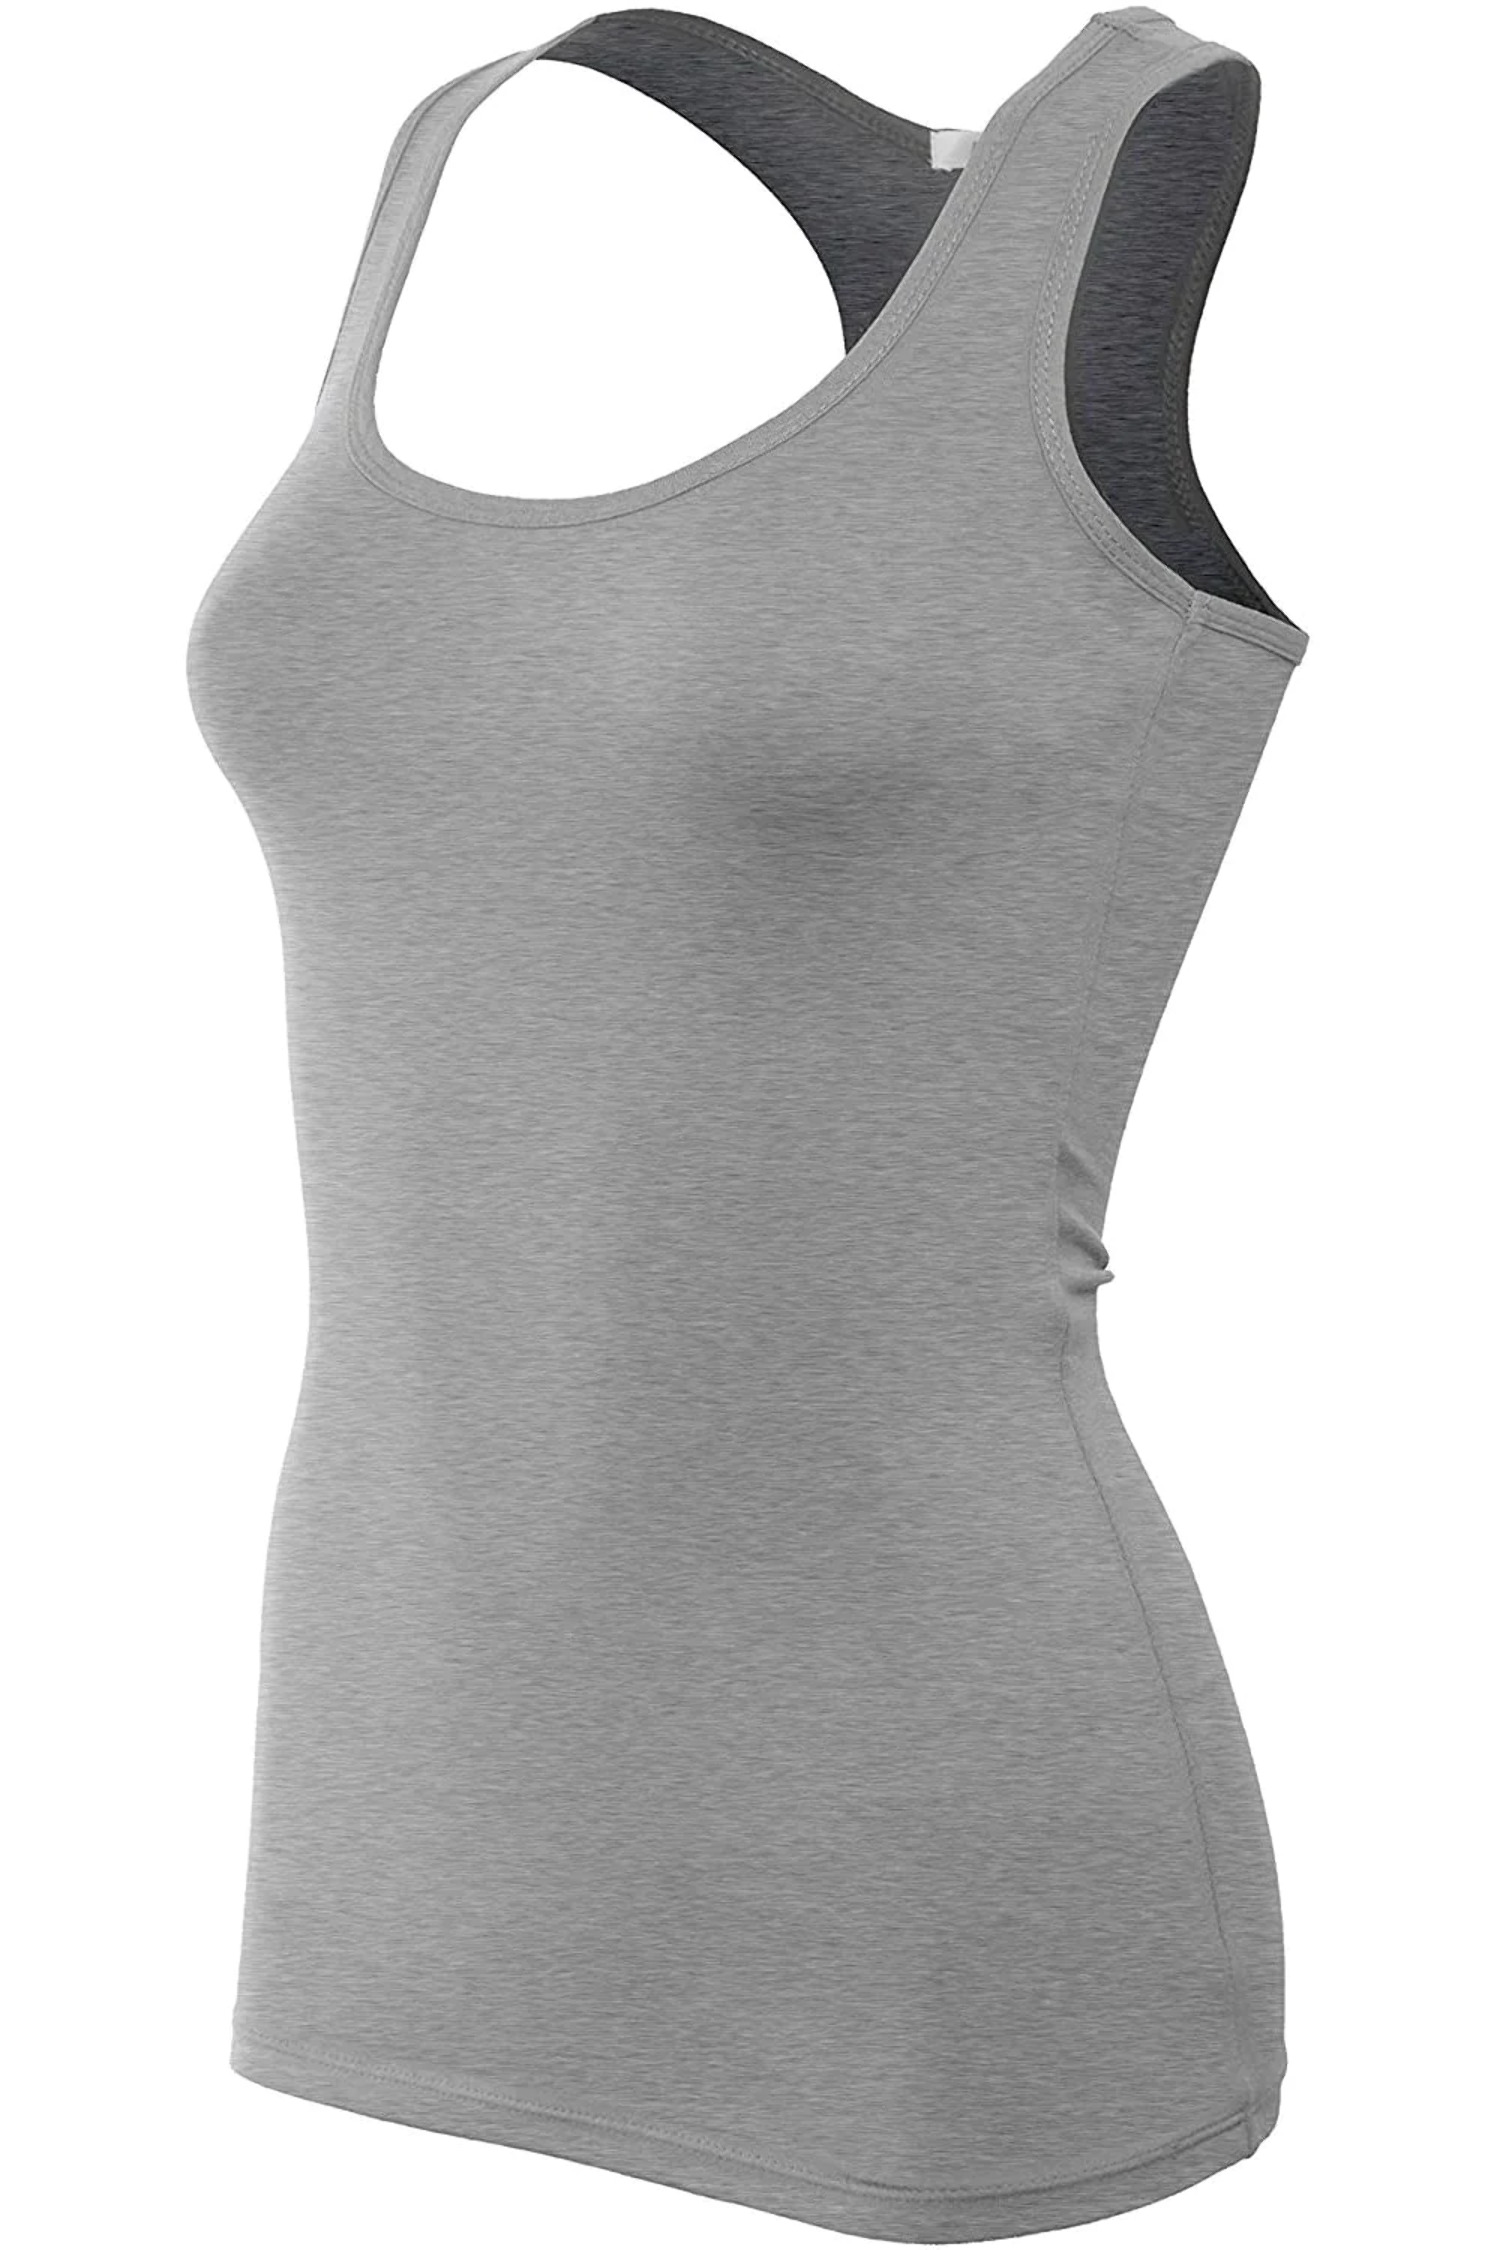 Bozzolo Women's Basic Cotton Spandex Racerback Solid Plain Fitted Tank Top -RT1777 - image 1 of 11